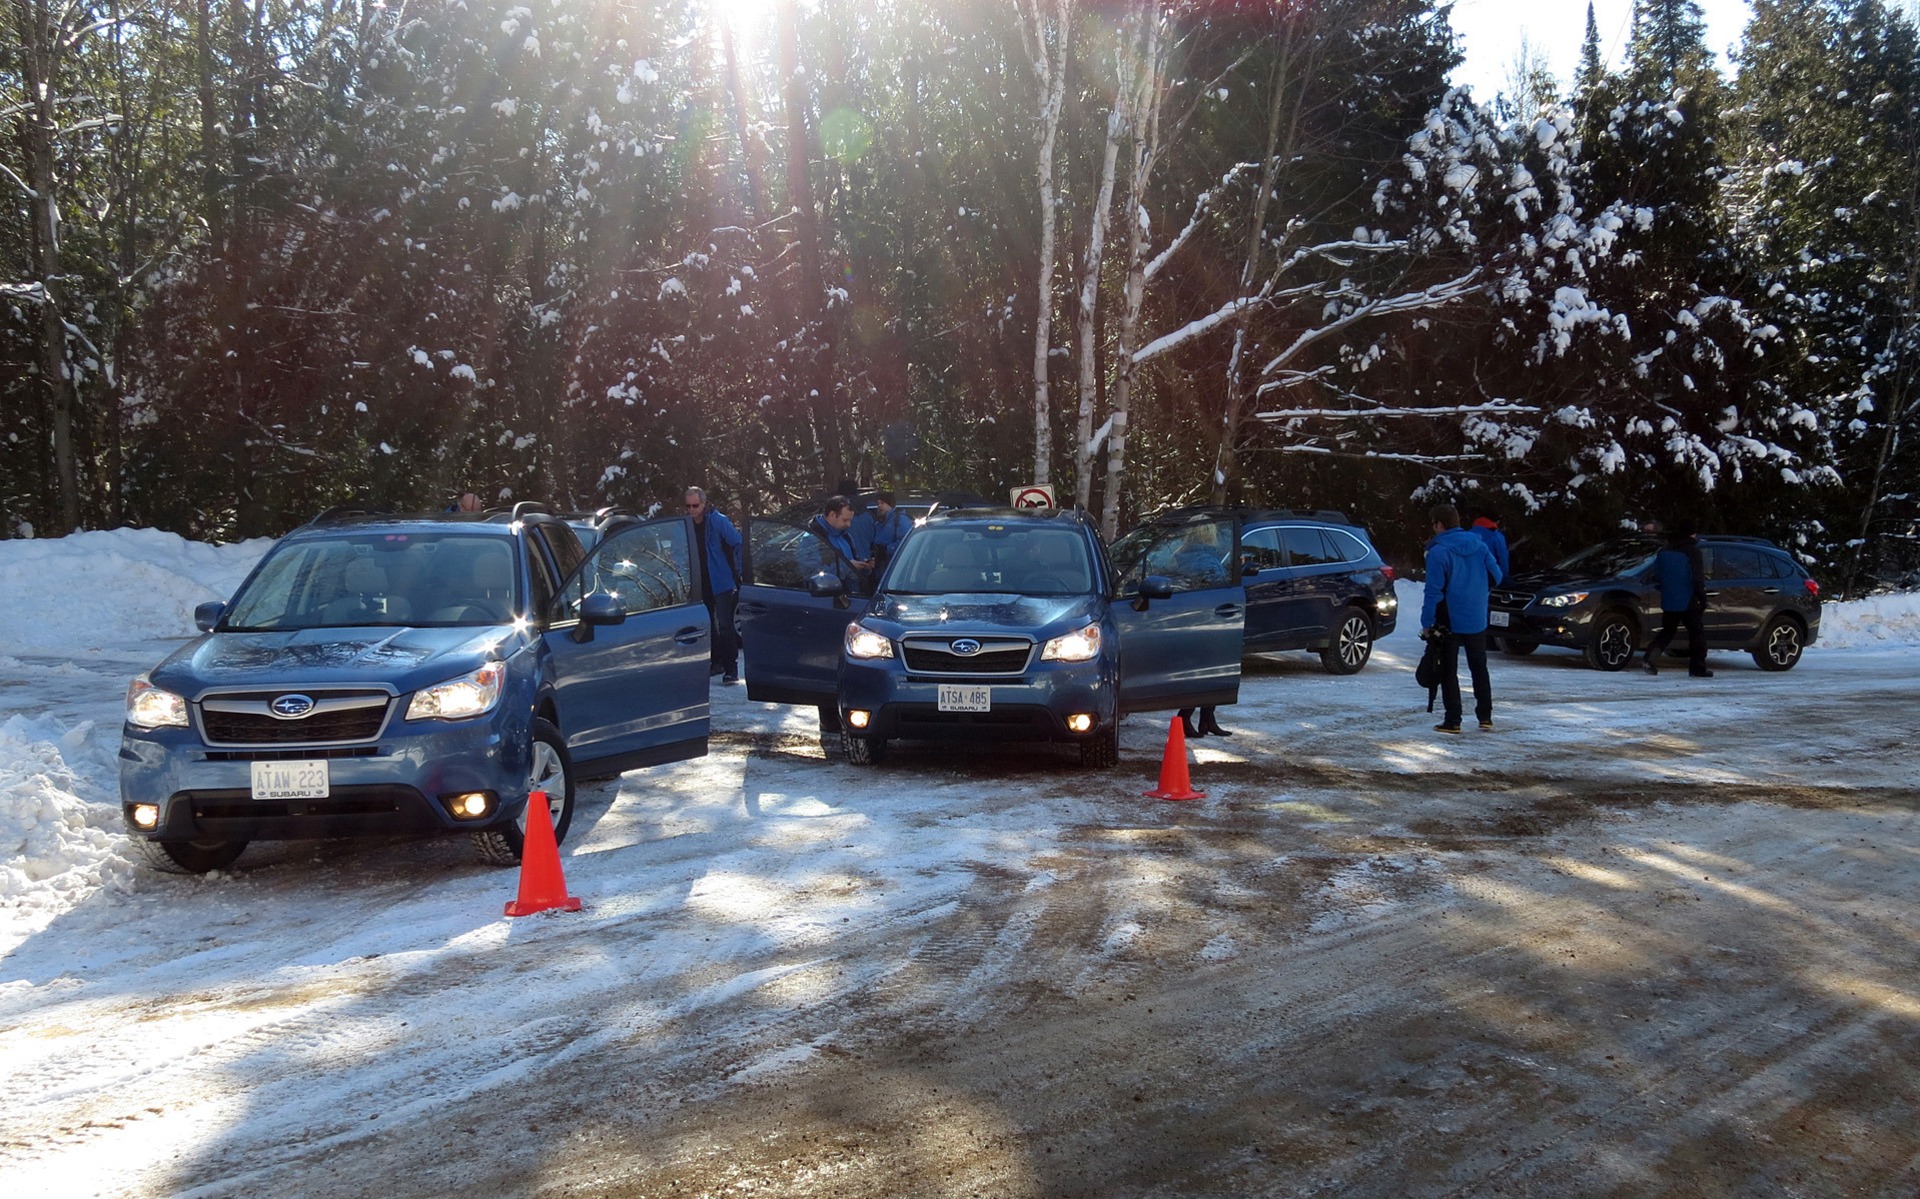 Twelve journalists test out a half-dozen Subarus on a beautiful winter day.